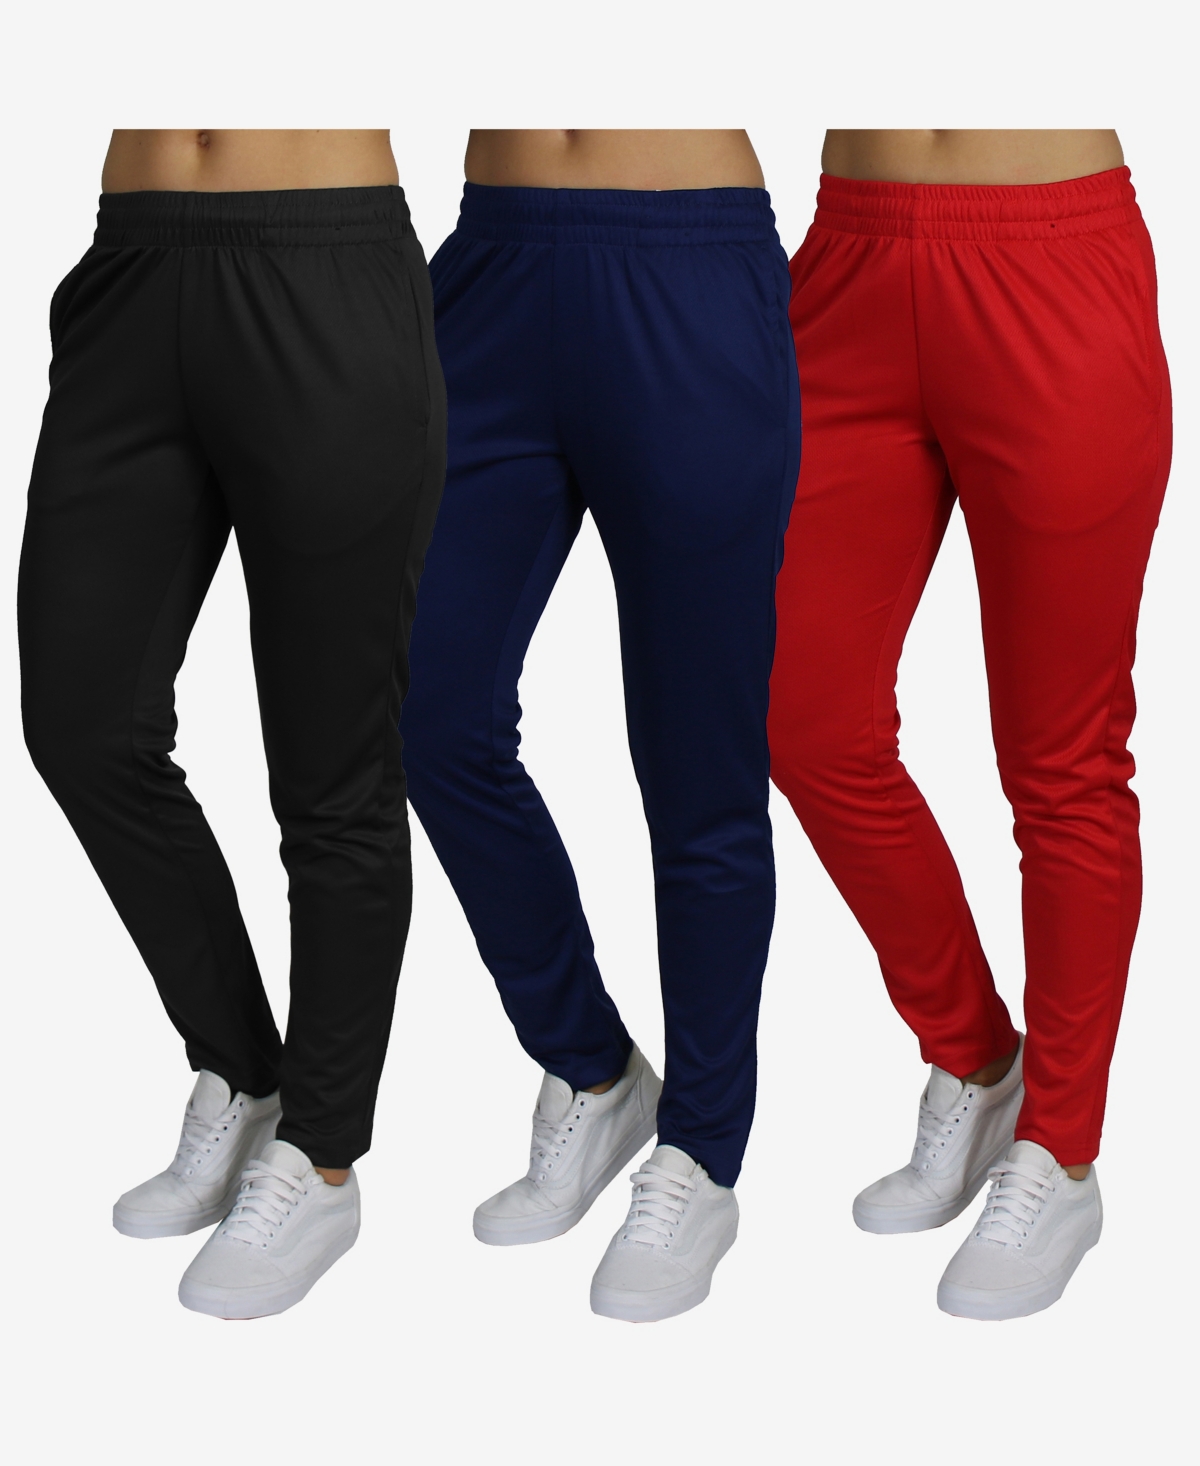 Women's Moisture Wicking Fashion Performance Pants, 3 Pack - Black, Navy, Red